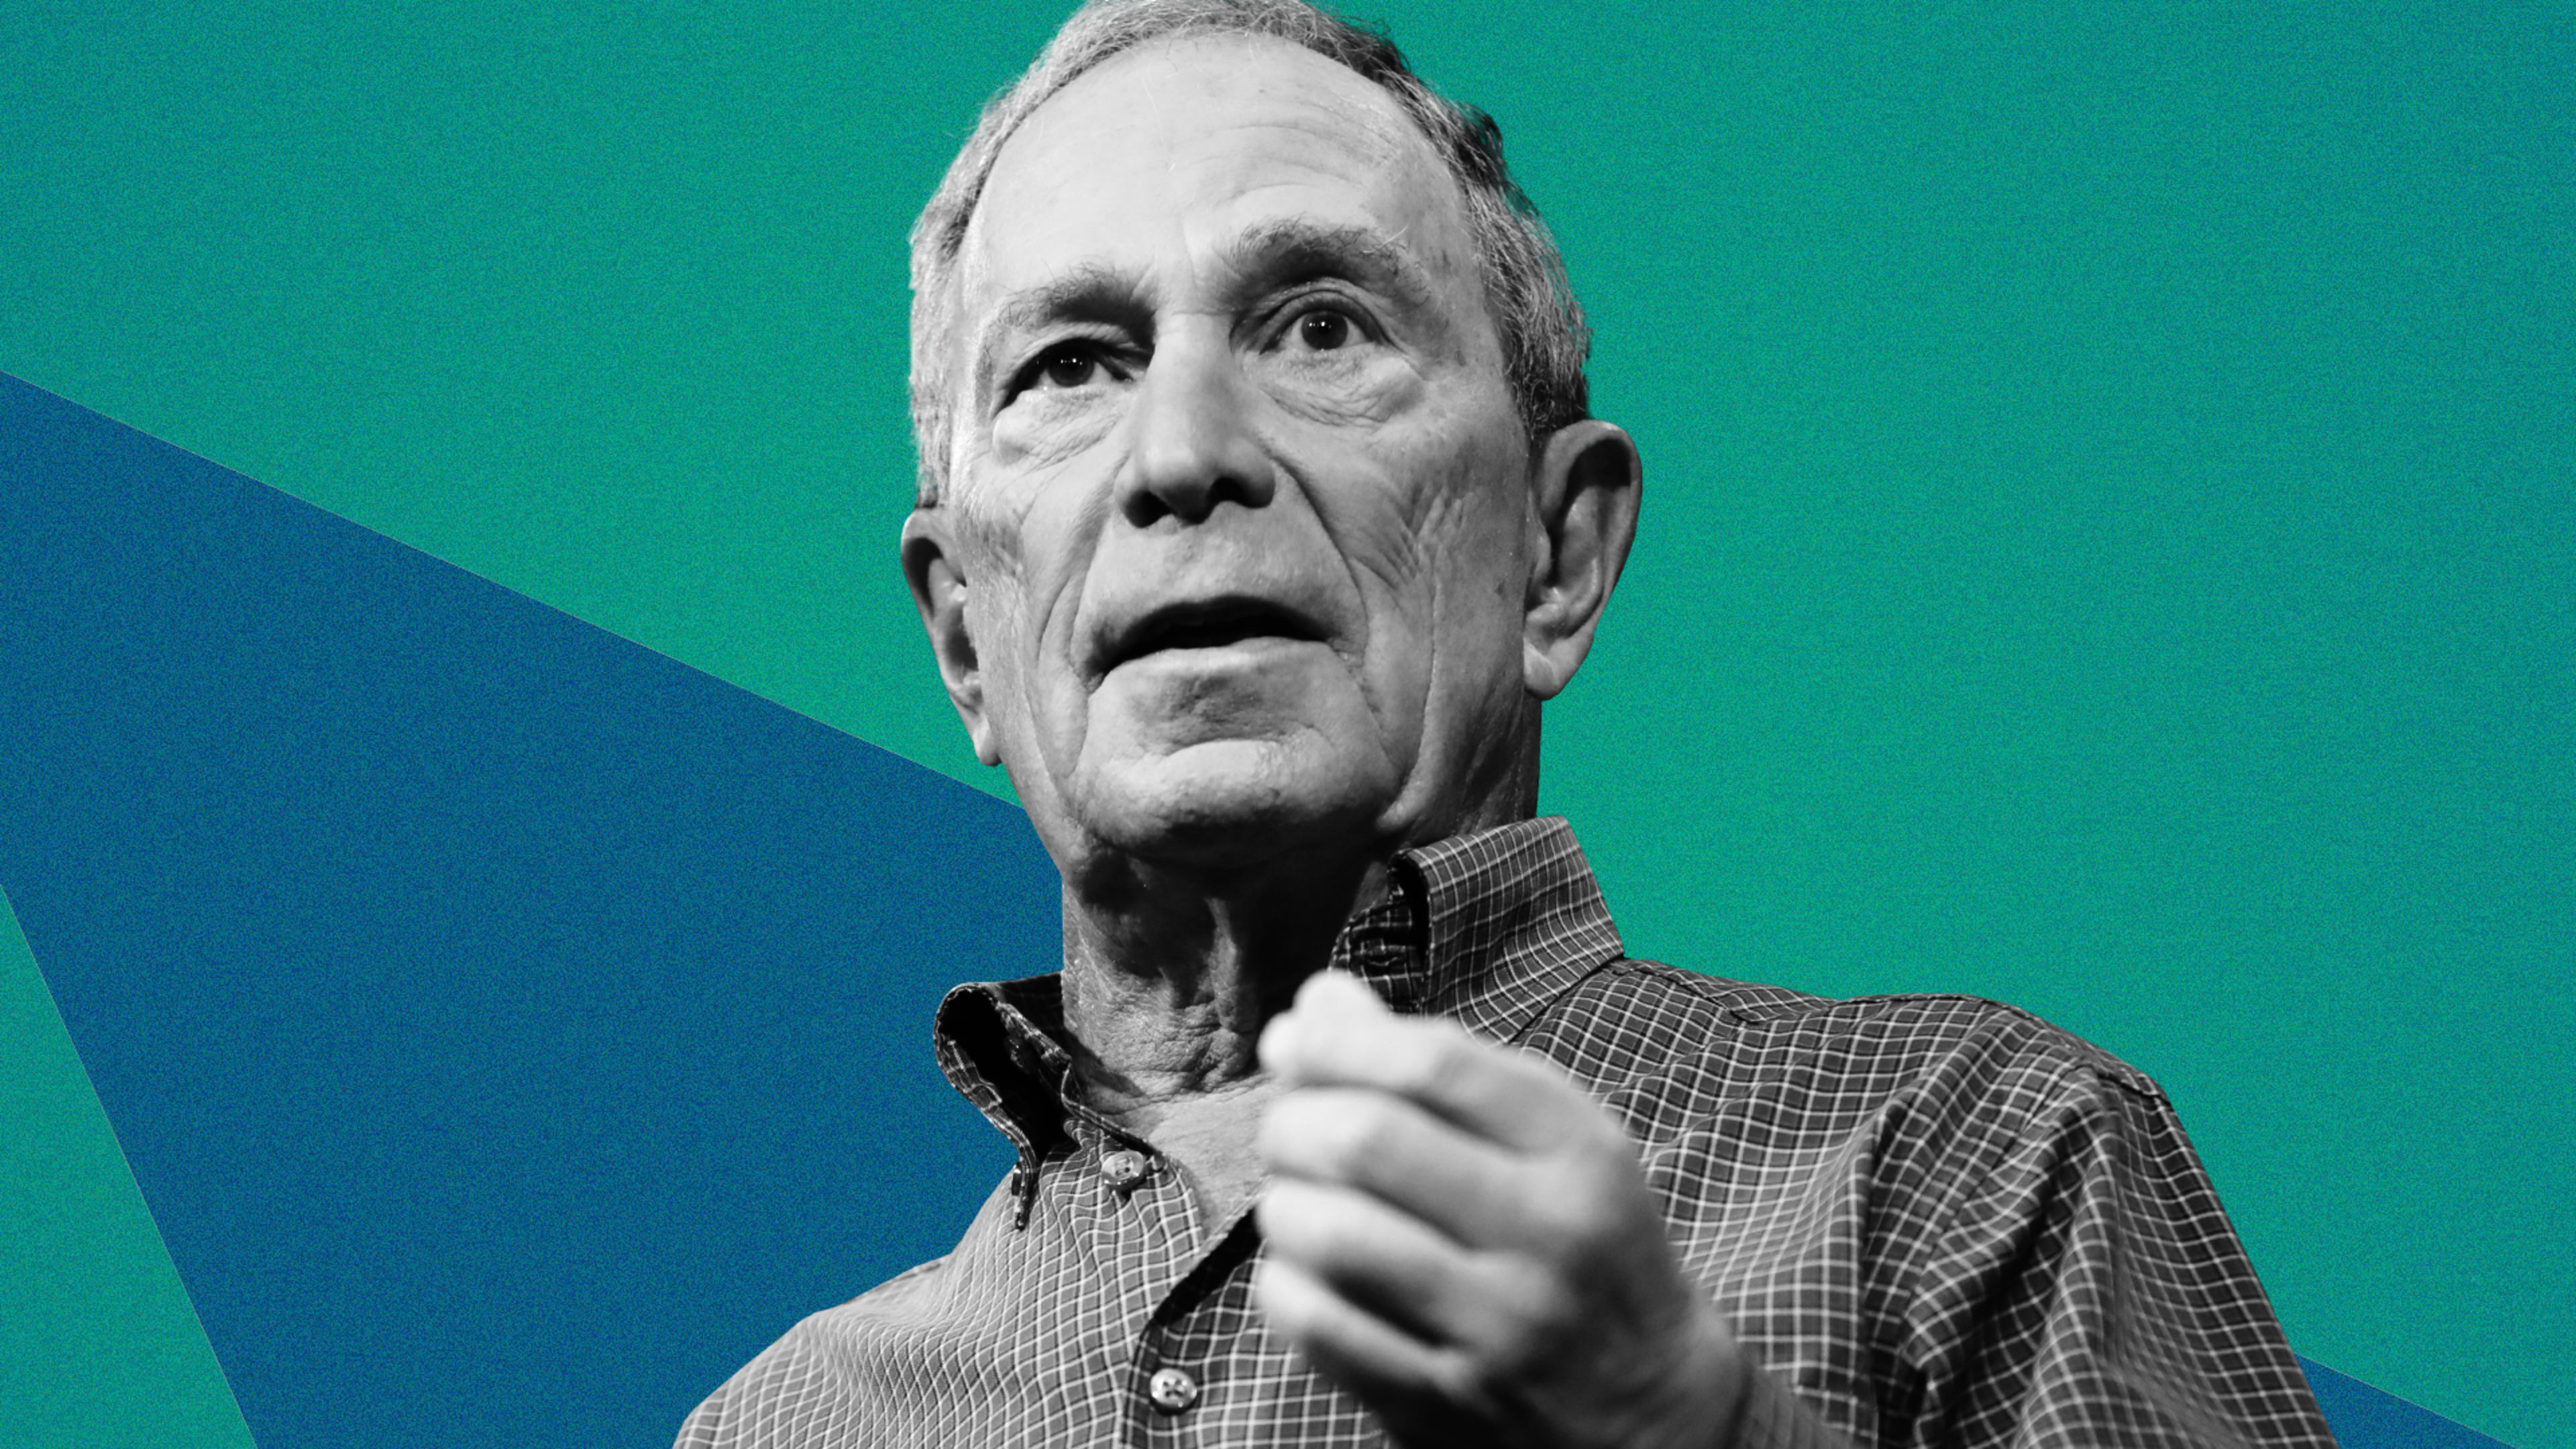 The wildest theory about Mike Bloomberg’s 2020 run is that he doesn’t really want to win